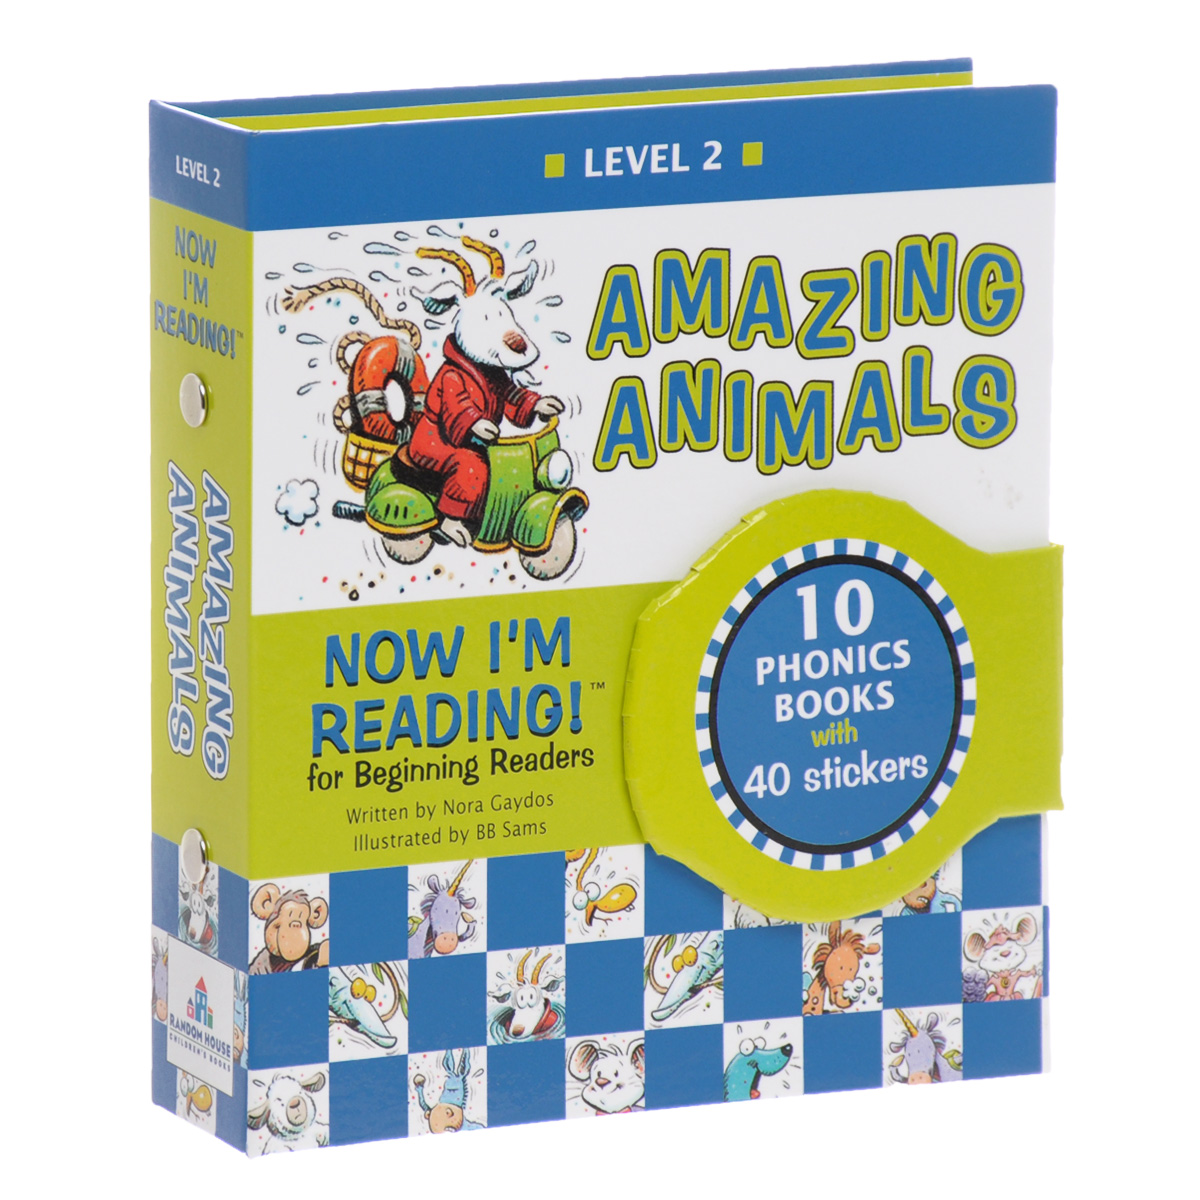 Now Im Reading! Level 2: Amazing Animals (  10  + ) - Nora Gaydos, B. B. Sams12296407LEARN TO READ WHILE HAVING FUN! Zany illustrations, funny animal stories, and teacher-approved learning methods come together in this collection of 10 story booklets for young readers to enjoy. Meet an ape baking a cake for his date, a mule who makes music, a floating goat, and more in this collection of humorous stories and zany illustrations! Each of the stories in this Level 2 reader focuses on one specific long vowel sound and uses simple, clear text and a building-block approach to help beginning readers have fun while learning key words. Includes 10 story booklets, 40 incentive stickers, After You Read easy comprehension questions and Skills in This Story sections in each book, and a parent guide to help parents get the most out of each story booklet. Perfect for ages 4 and up! Level 2 NIR readers focus on long and short vowel sounds, expanded simple consonant sounds, and beginning sight word reinforcement.     , ...